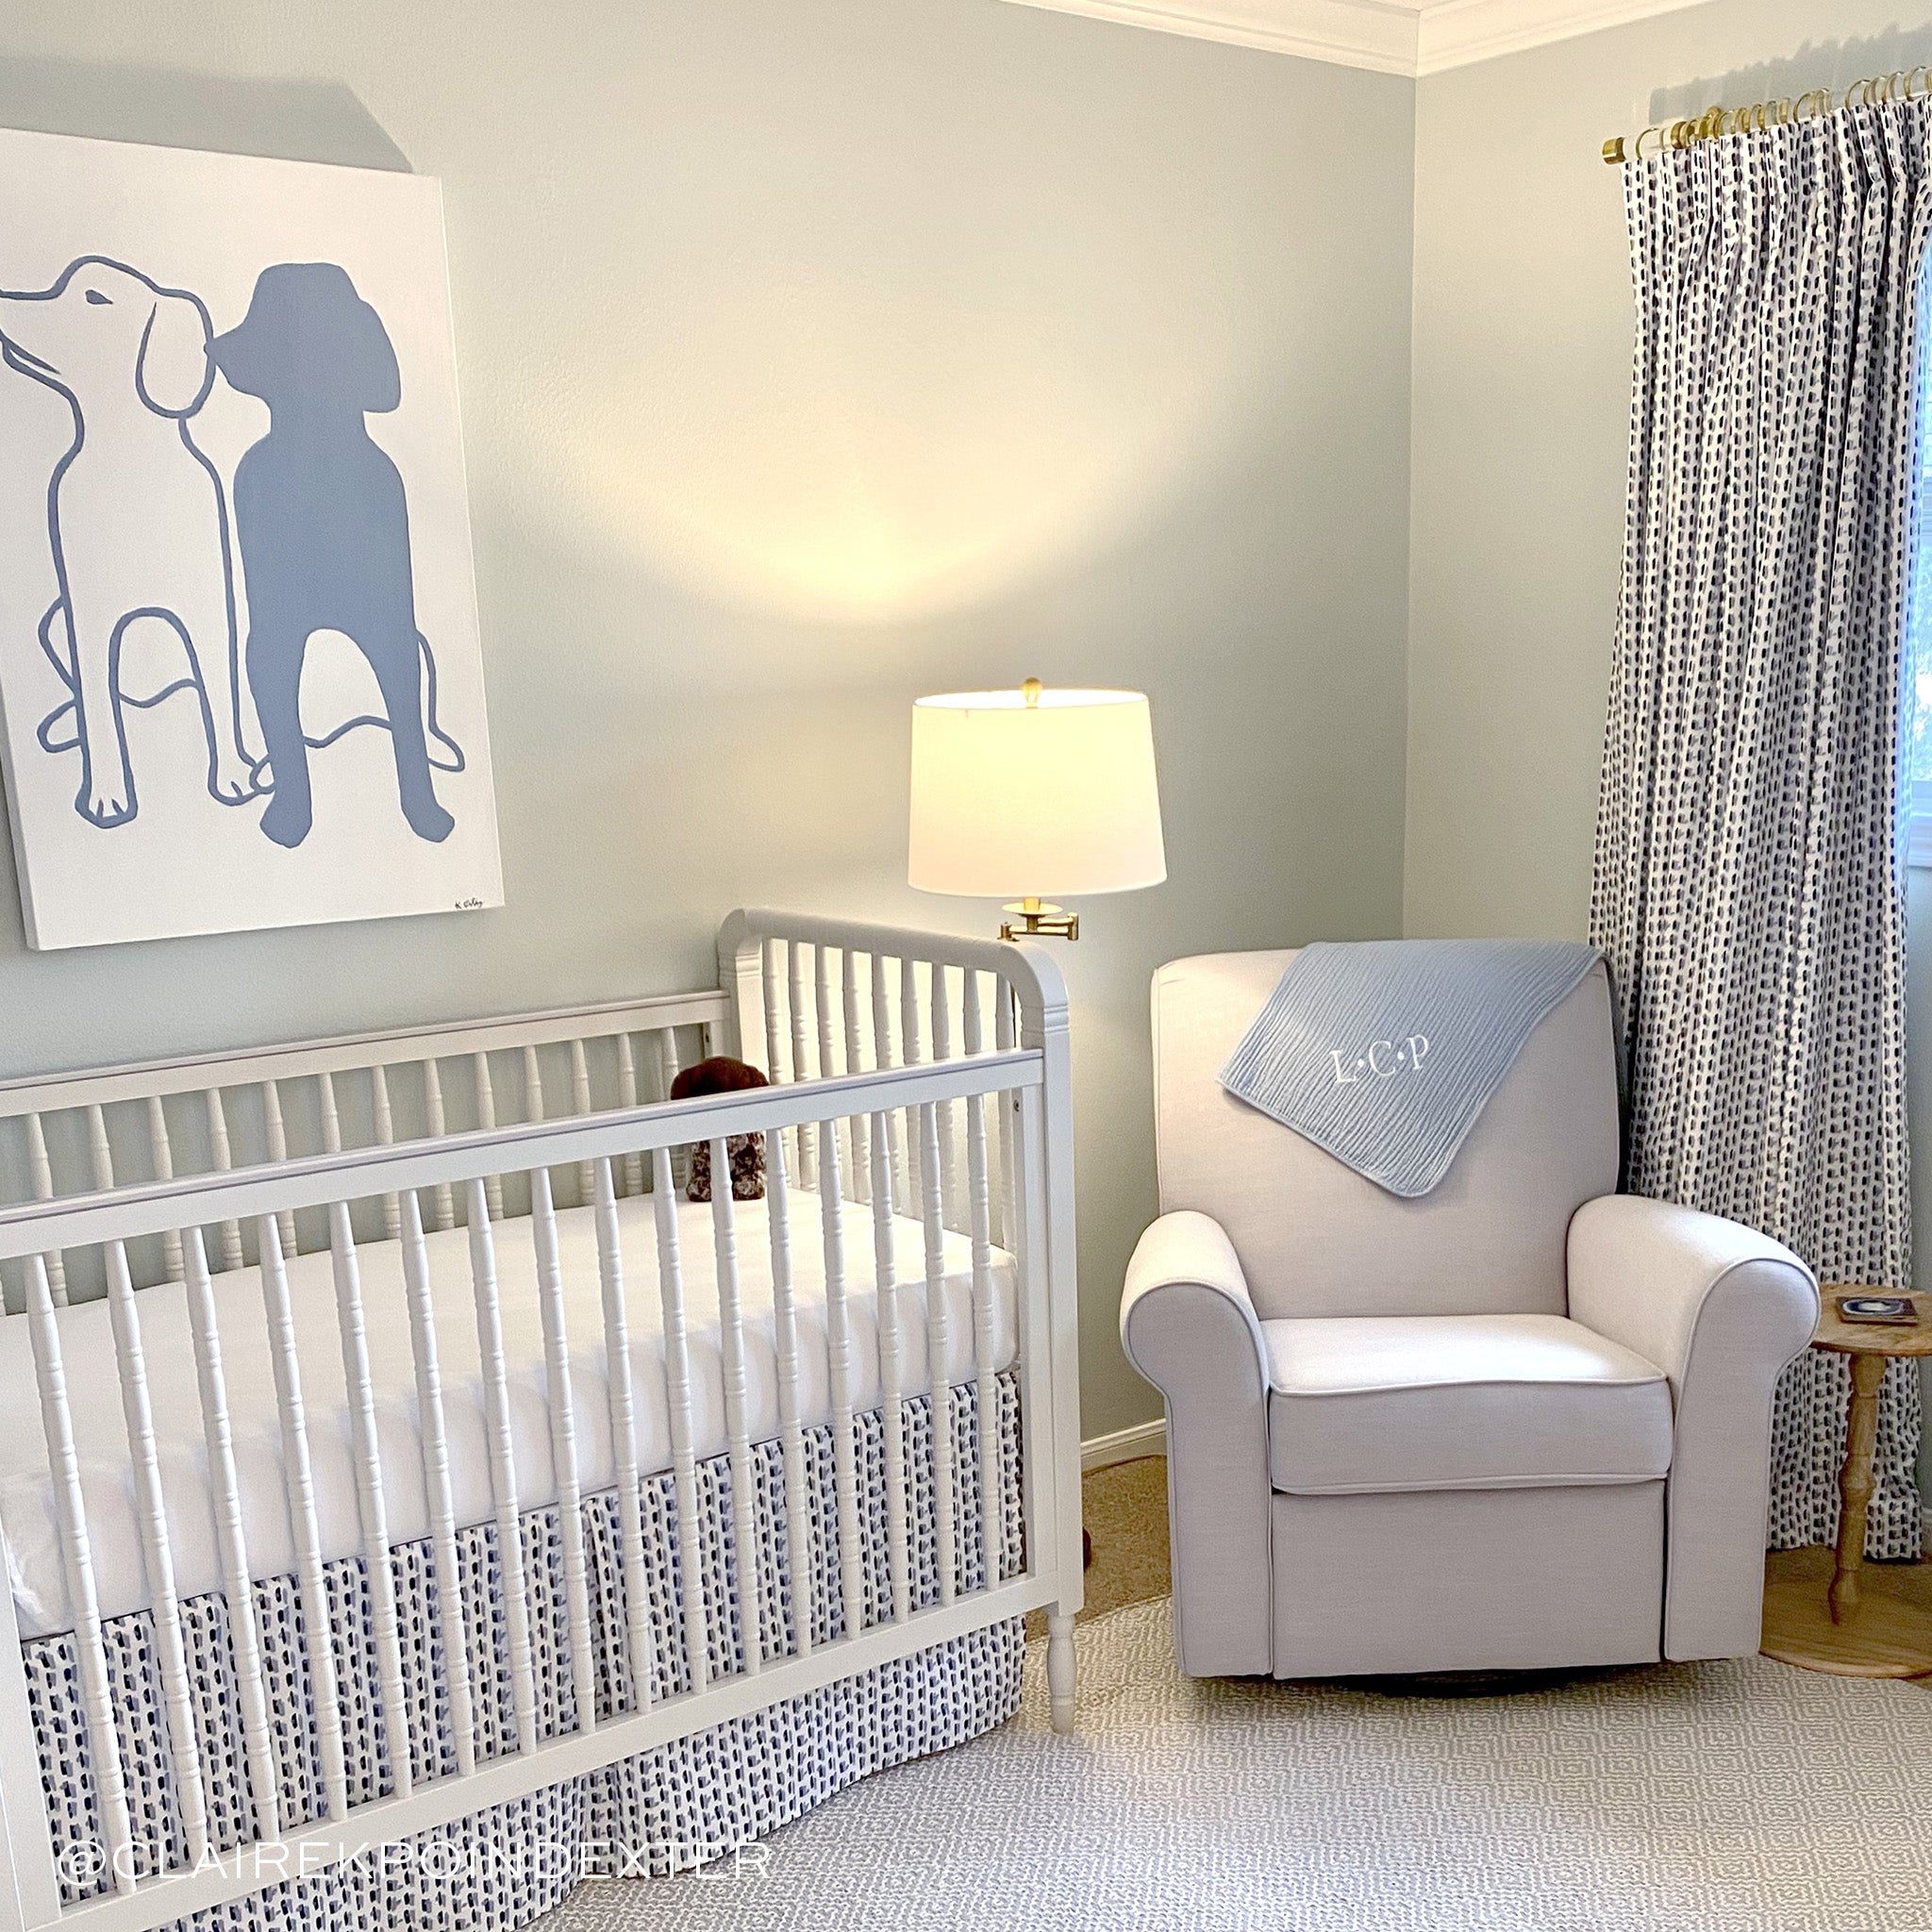 Nursery room styled with Sky and Navy Blue Poppy Printed Curtains matching Sky and Navy Blue Poppy Printed Crib Skirt in between gray couch with monogrammed blanket hanging. Photo taken by Claire K Poindexter